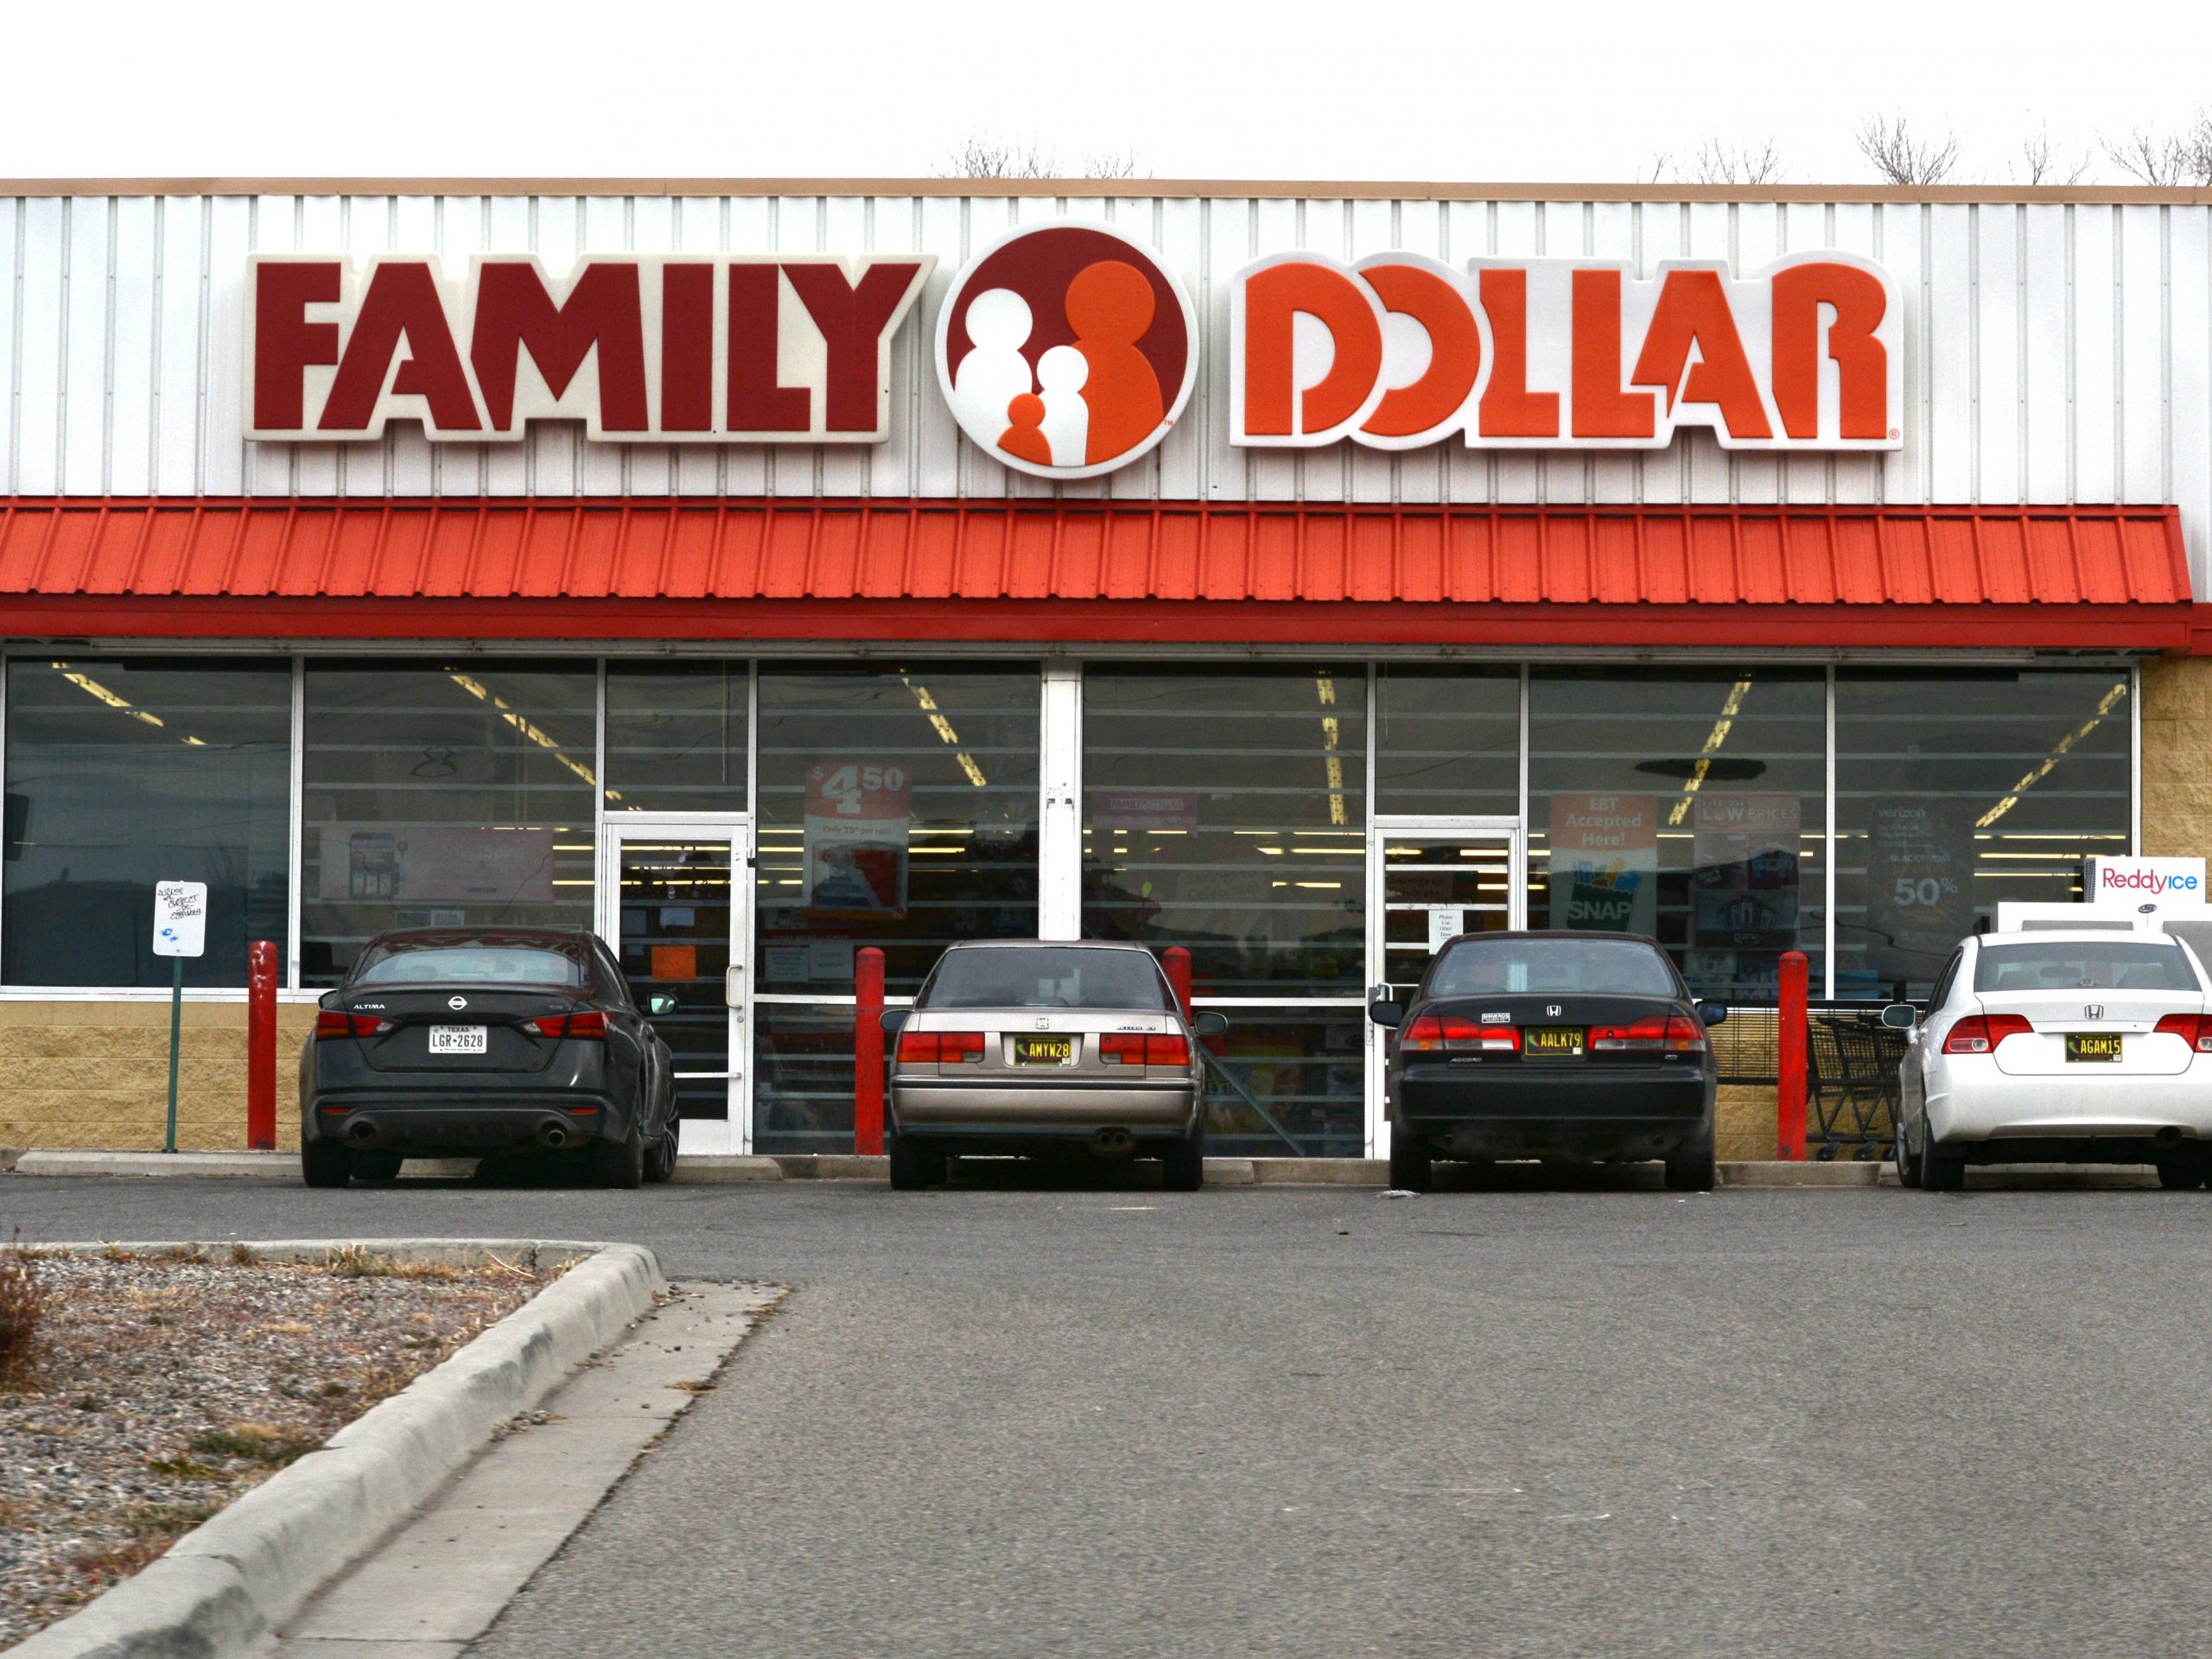 The front of a Family Dollar store in New Mexico.